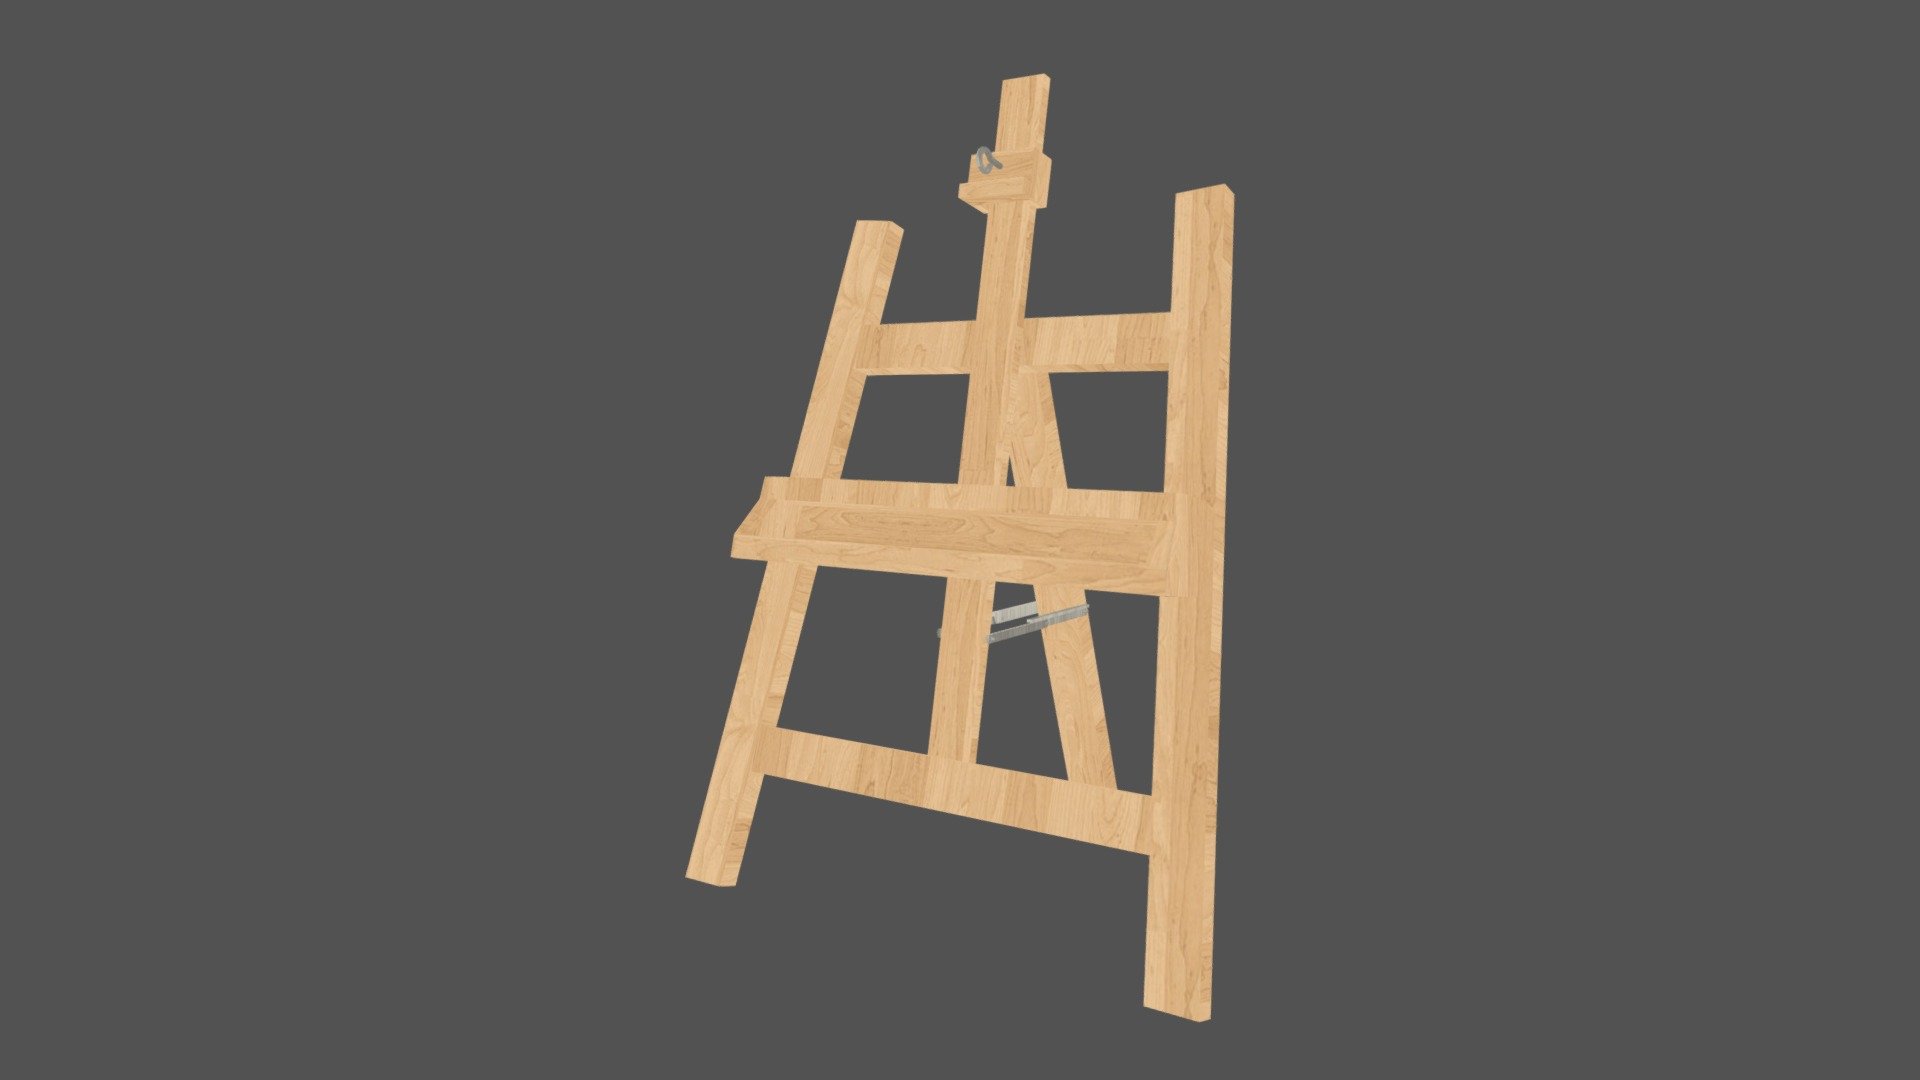 This is a PBR painter's easel which isloated block and pin for securing a canvas.

Contains morph (key shape) for folding the easel up as shown in this video link: https://youtu.be/SSVwygvFYq4

Contains a natural wooden texture with metallic hardware.

UV mapping template file included for reference 3d model